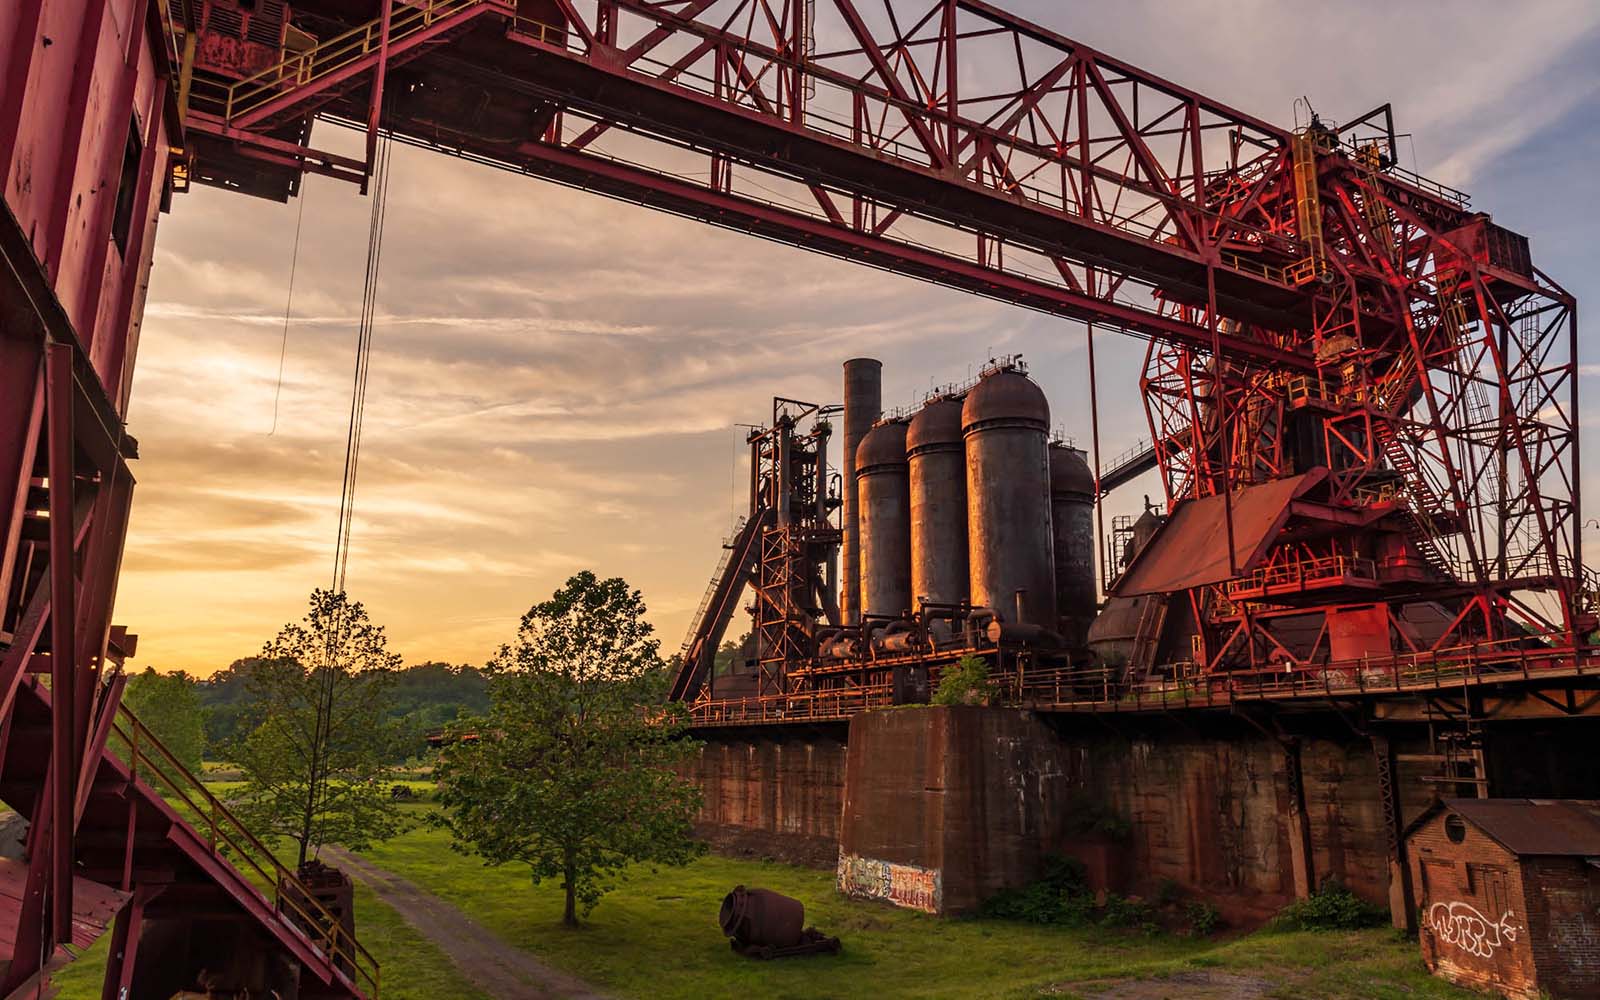 A yellow sunset softly illuminates the stack and stoves of the Carrie Furnaces with an Ore Bridge spanning the foreground of the image.